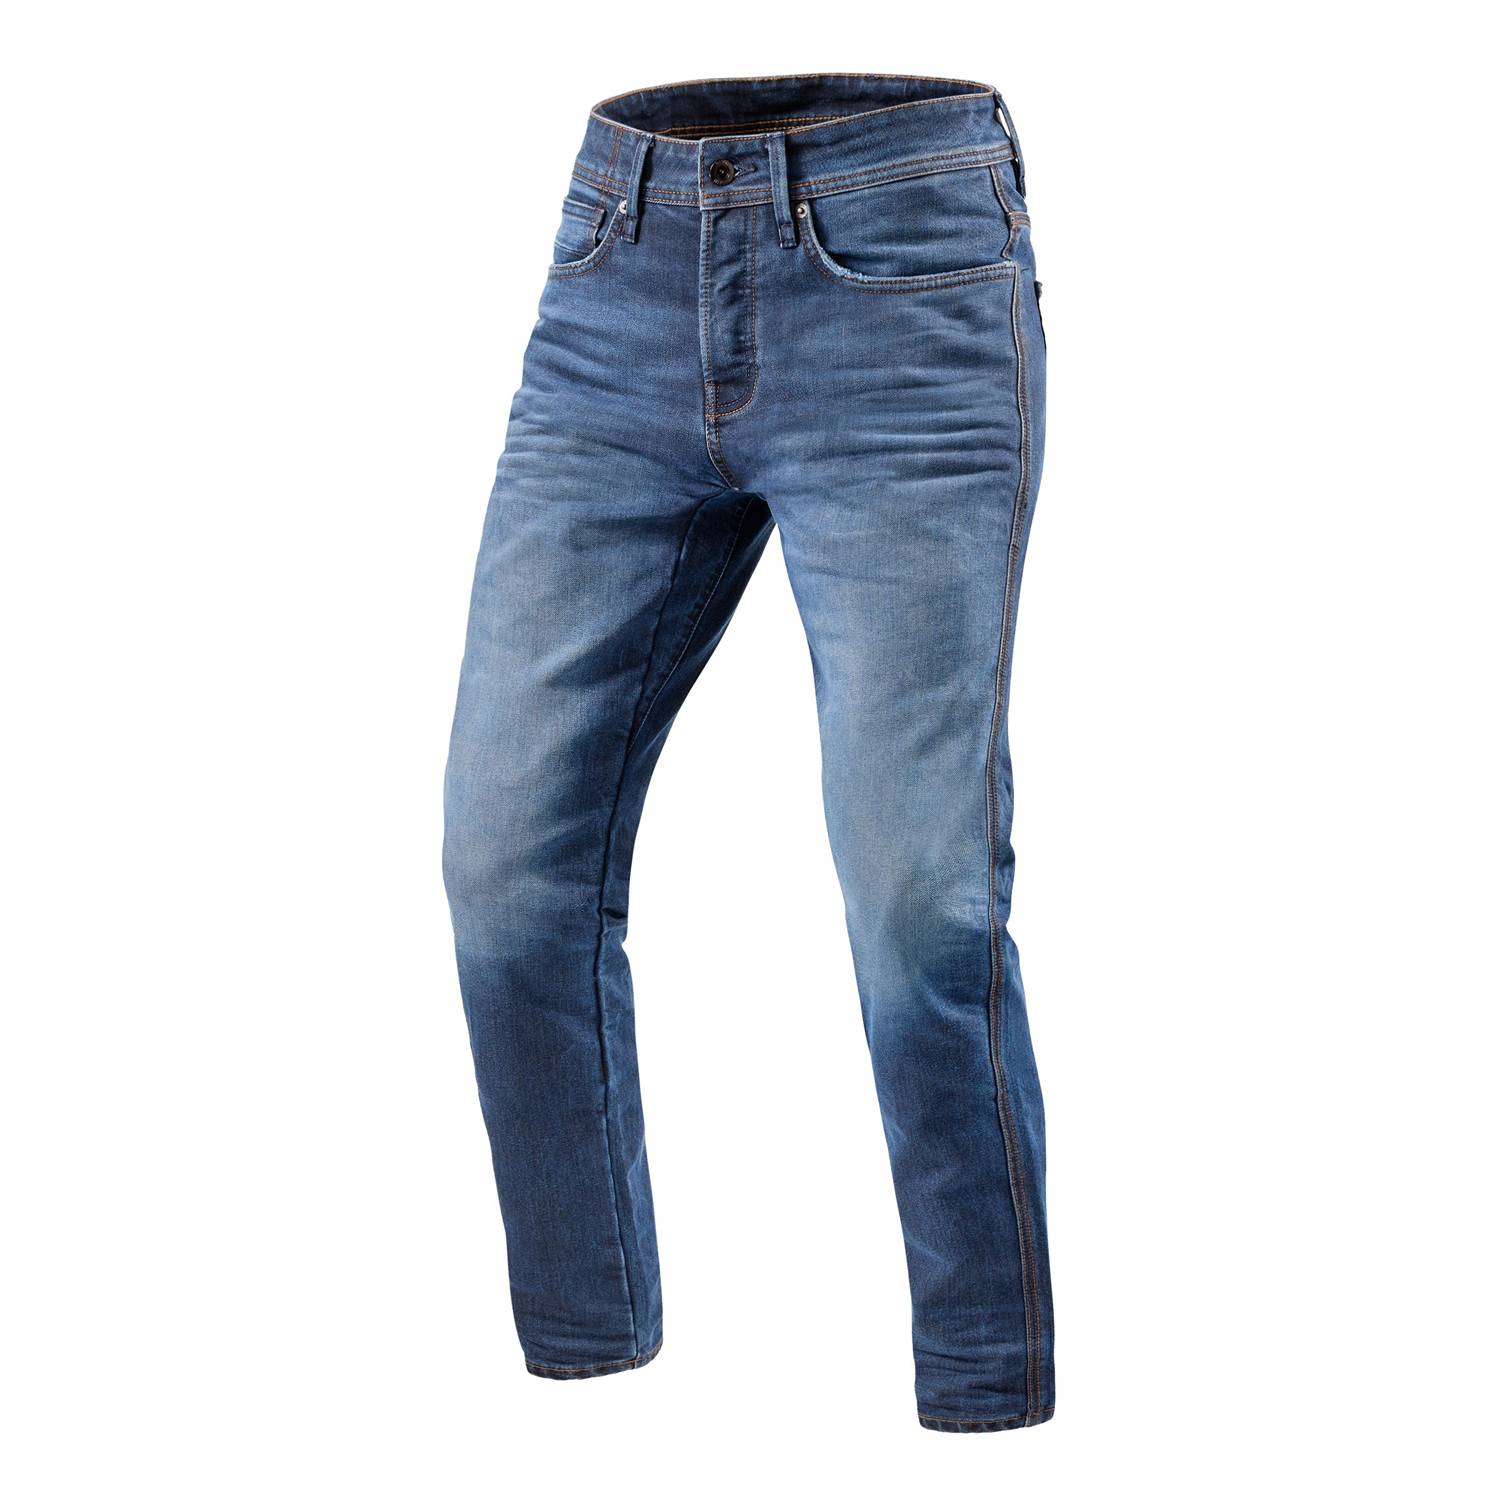 Image of REV'IT! Jeans Reed SF Mid Blue Used Motorcycle Jeans Size L34/W28 ID 8700001337137